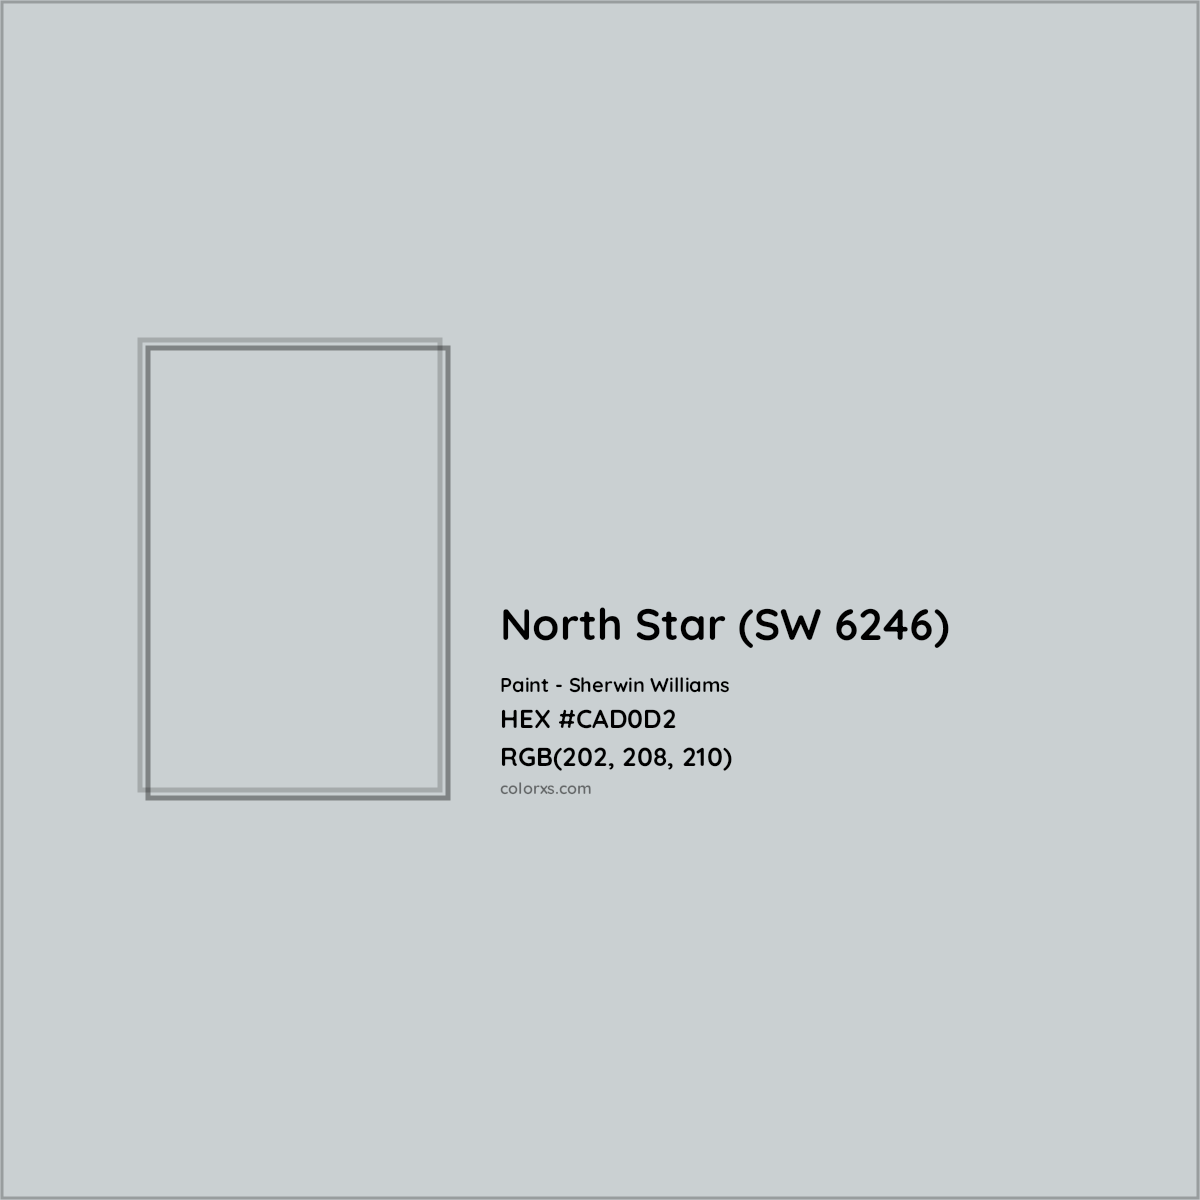 HEX #CAD0D2 North Star (SW 6246) Paint Sherwin Williams - Color Code